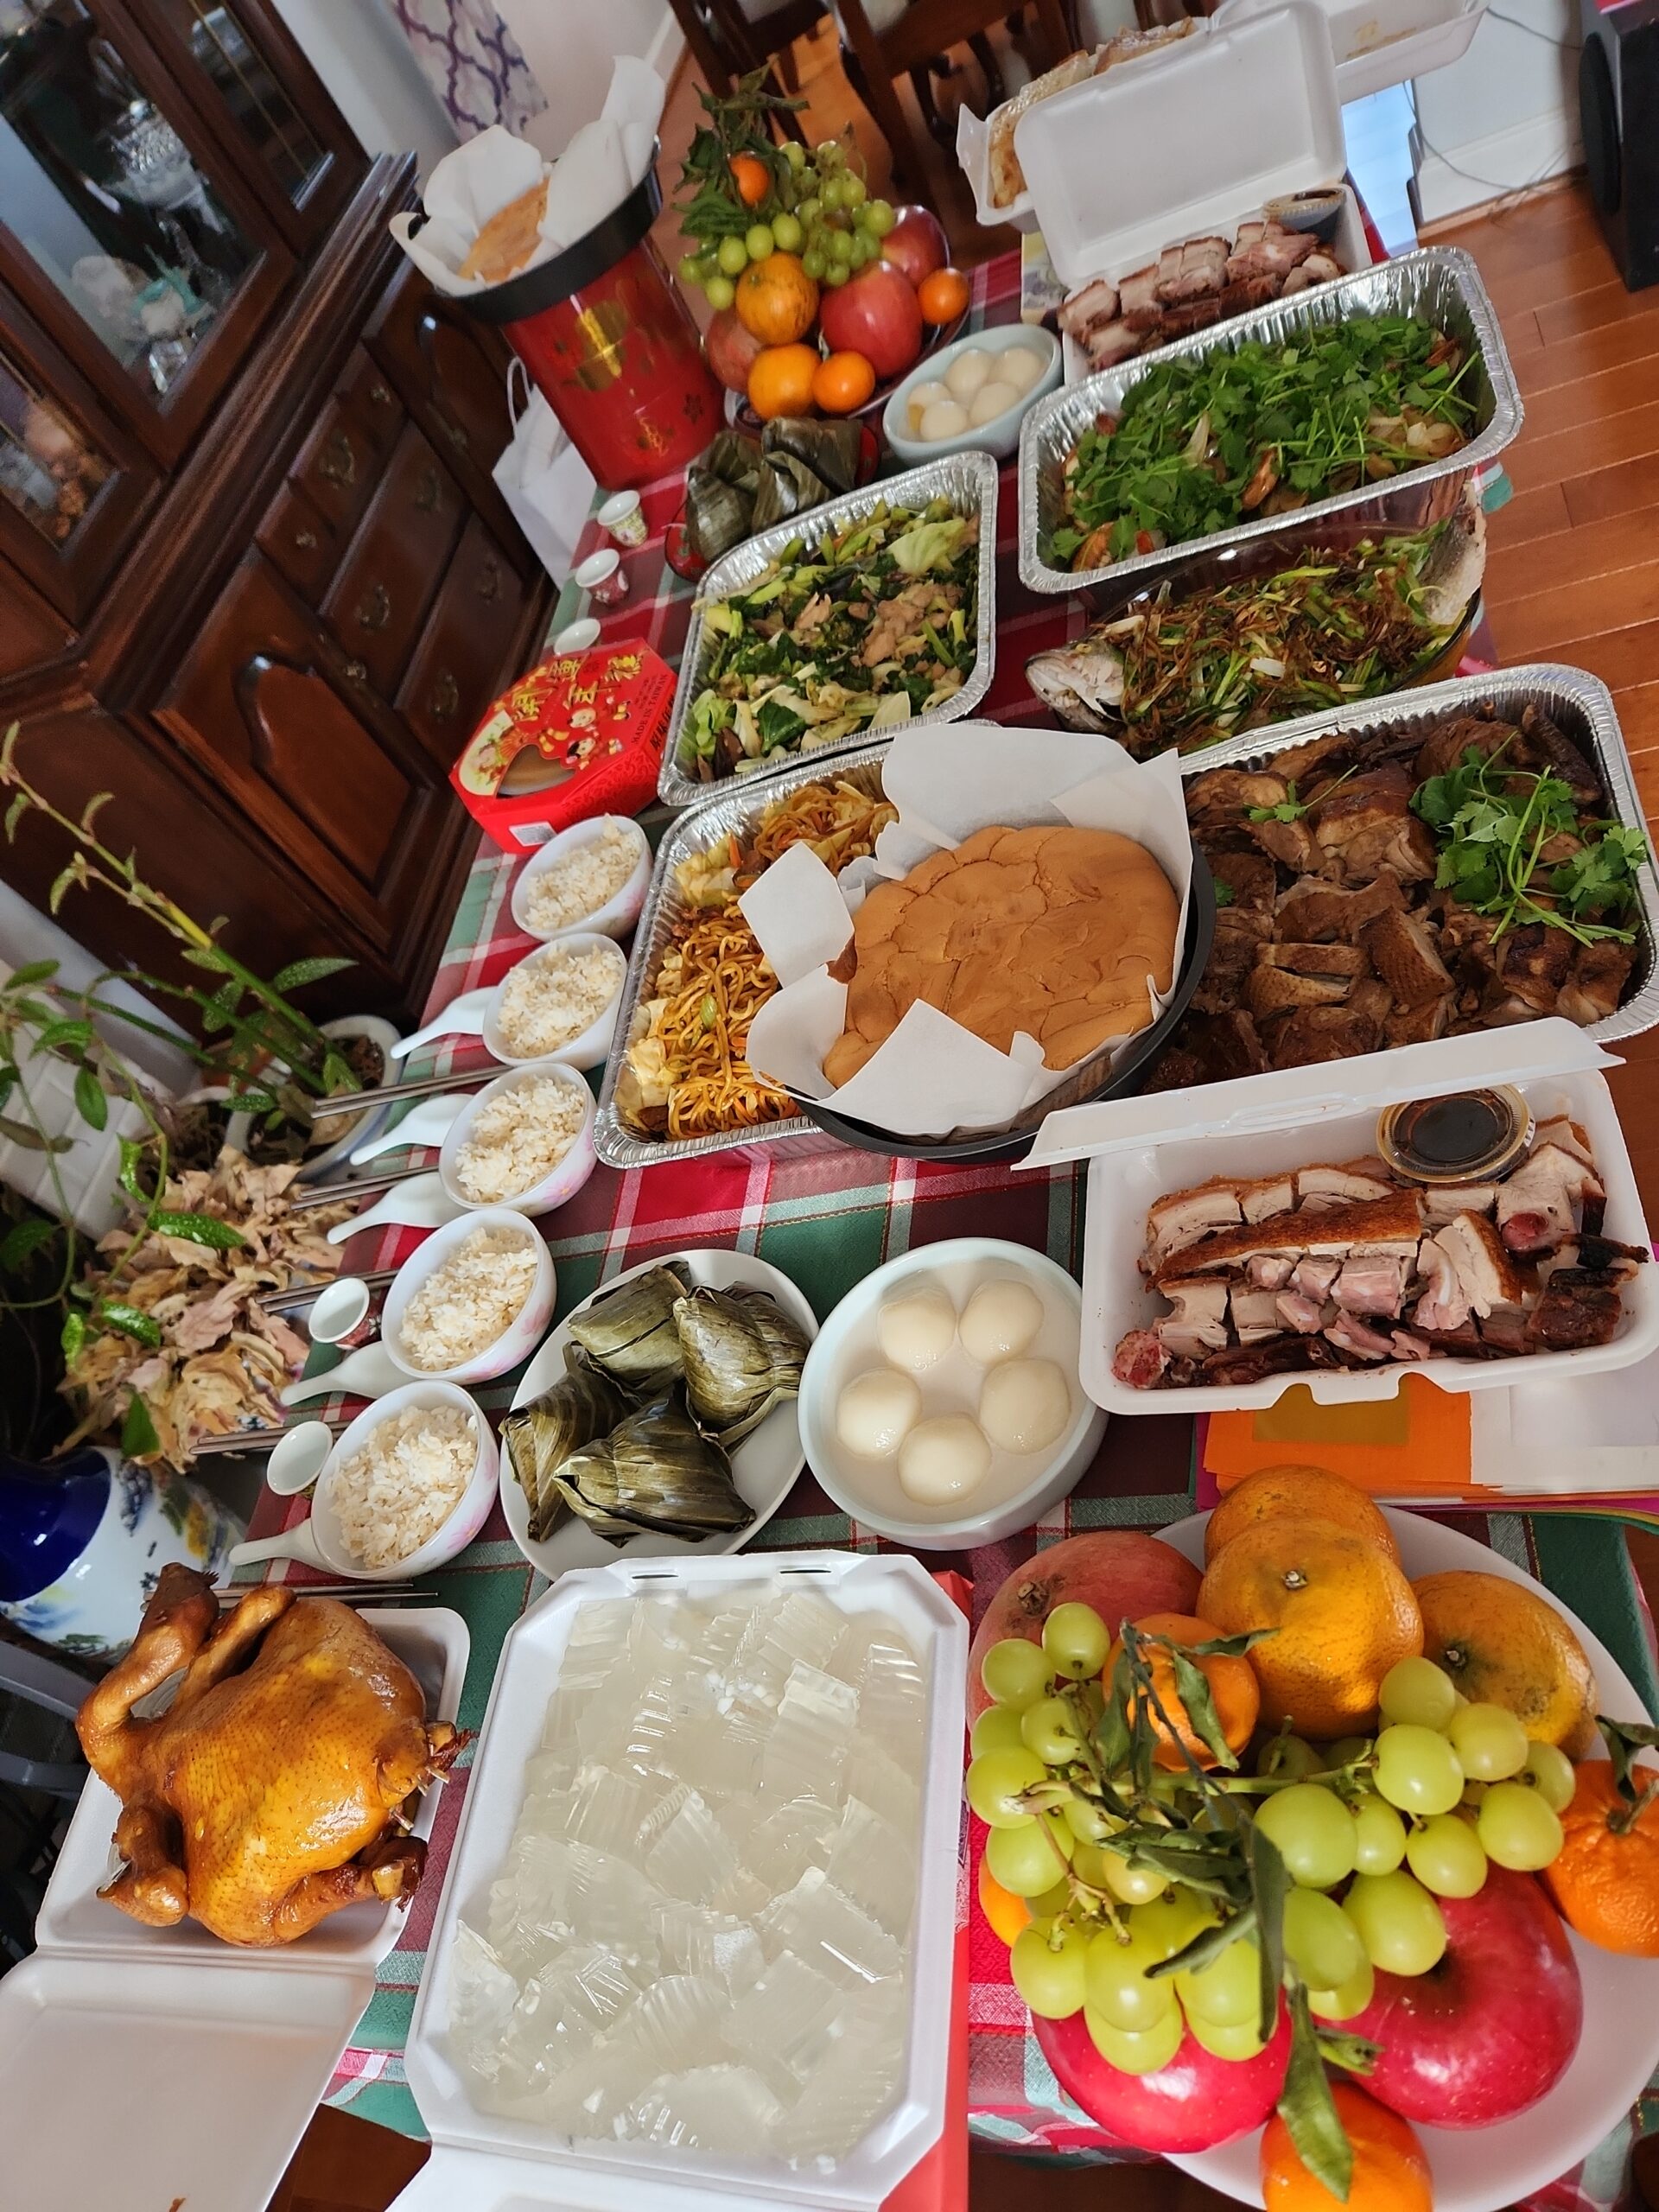 A table filled with Chinese traditional food for celebrating Lunar New Year